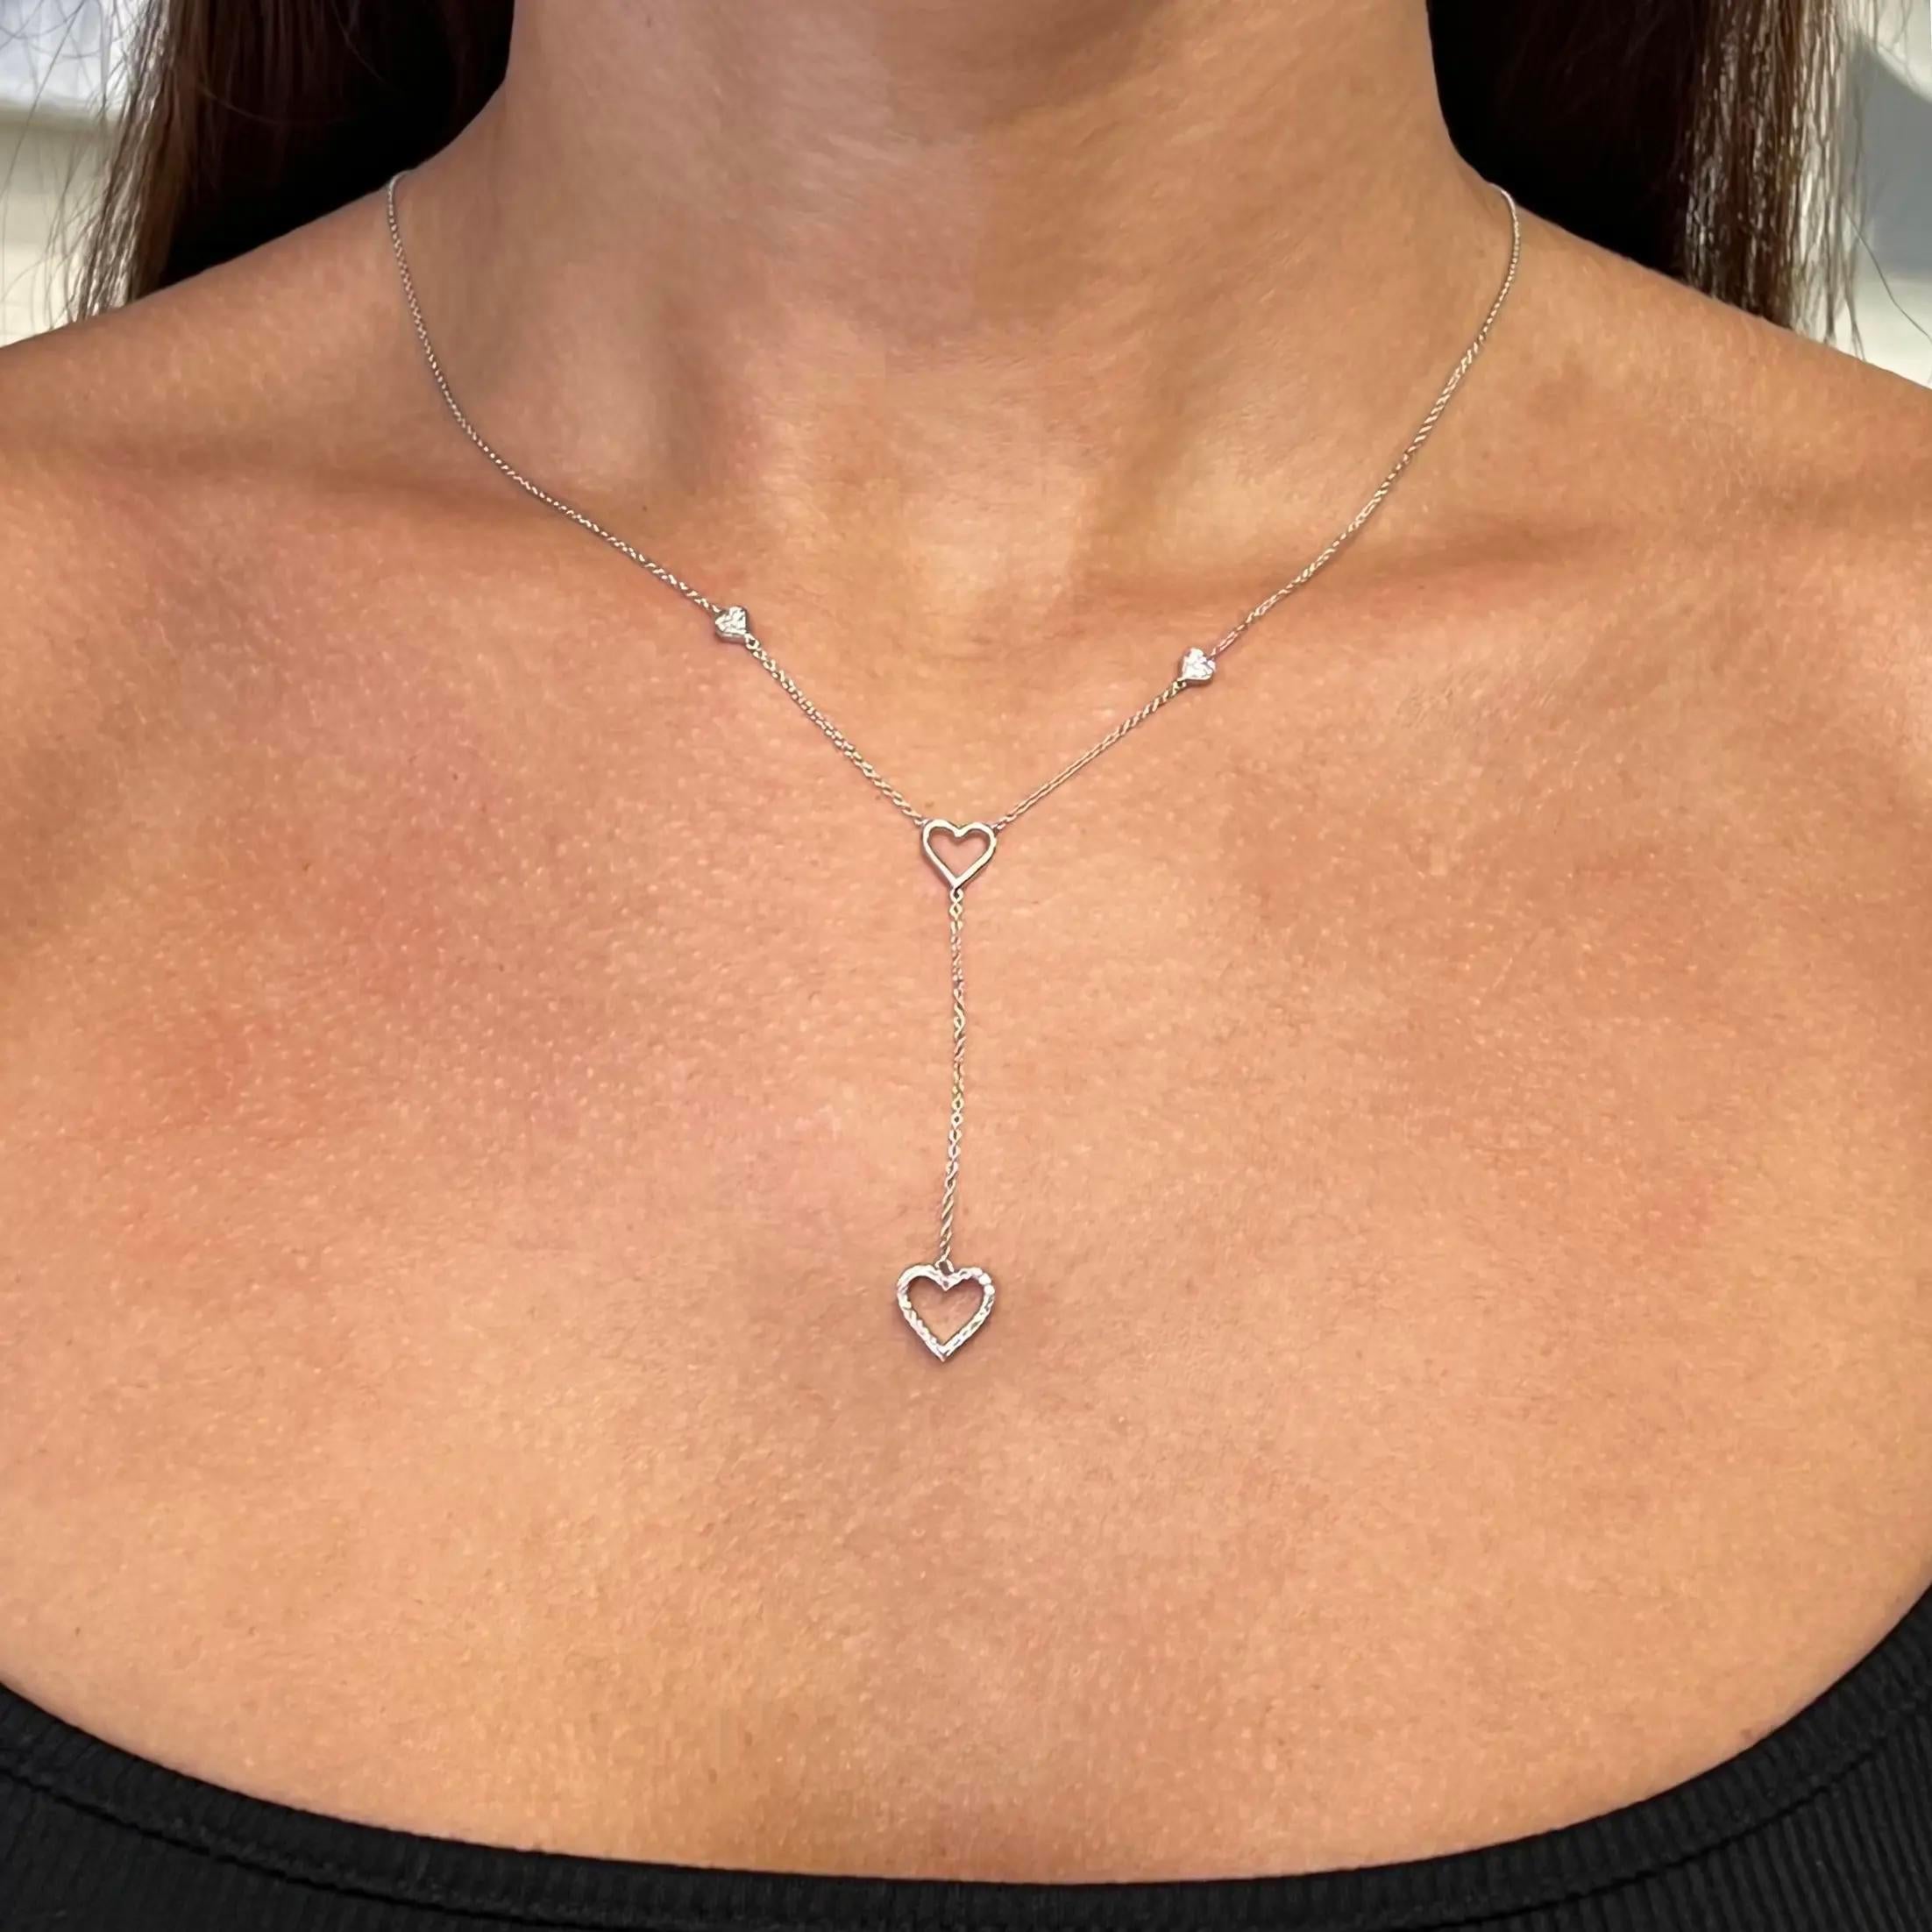 Diamond Heart Lariat Necklace Round Cut 14K White Gold 0.14Cttw In New Condition For Sale In New York, NY